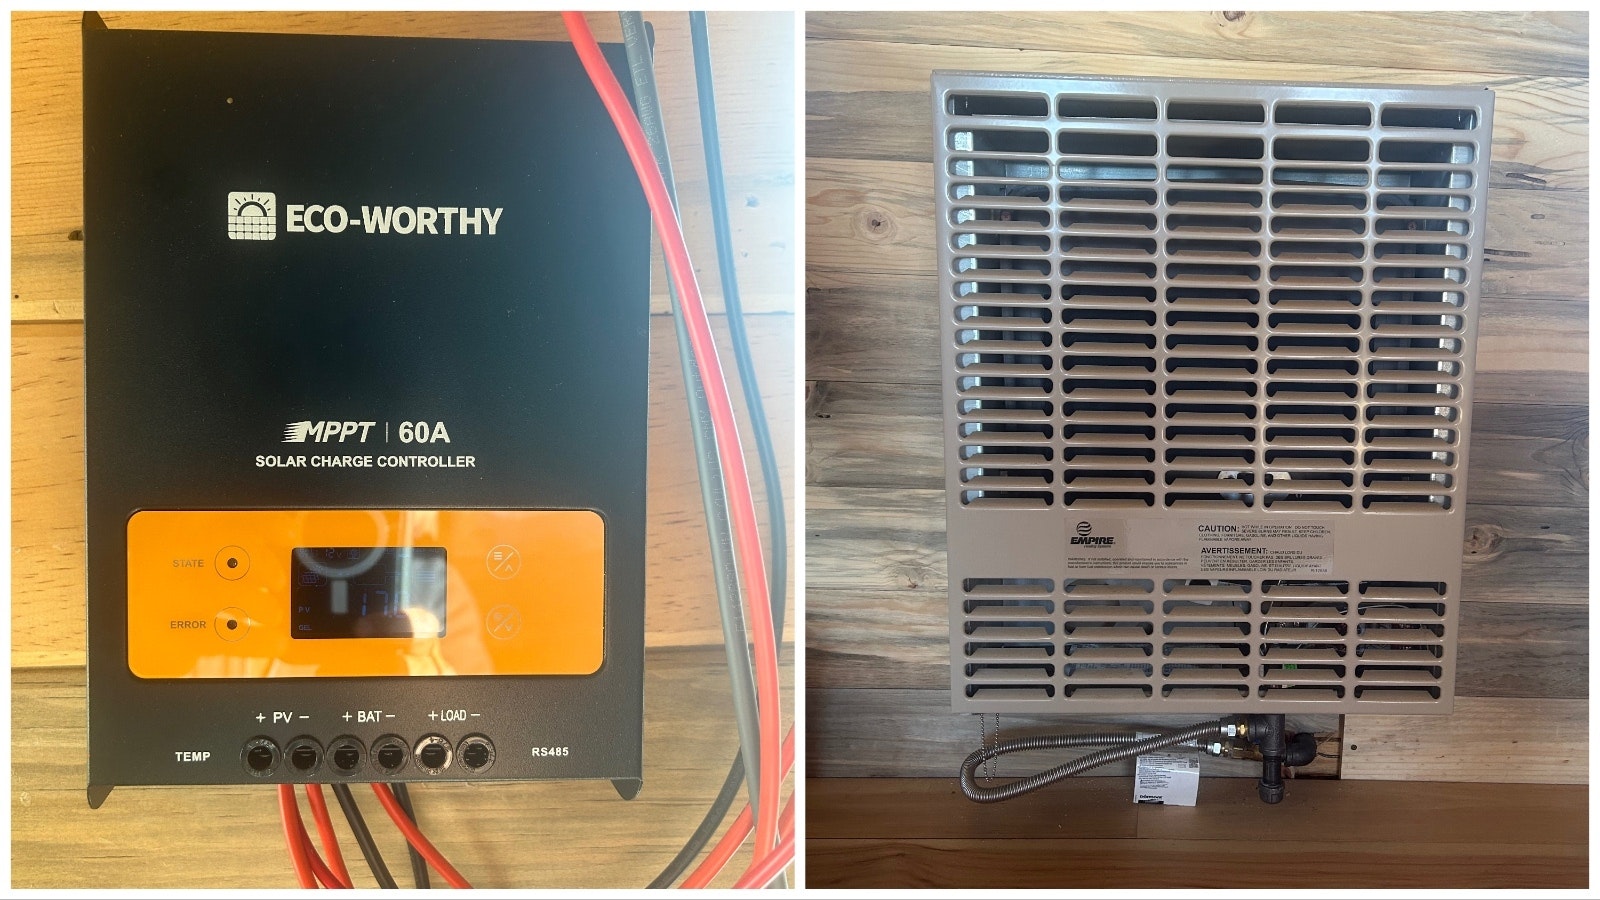 A solar charge controller, left, is an important part in an off-grid solar power system. At right, a propane furnace is a good source of backup heat in an off-grid cabin heated primarily with a wood stove.